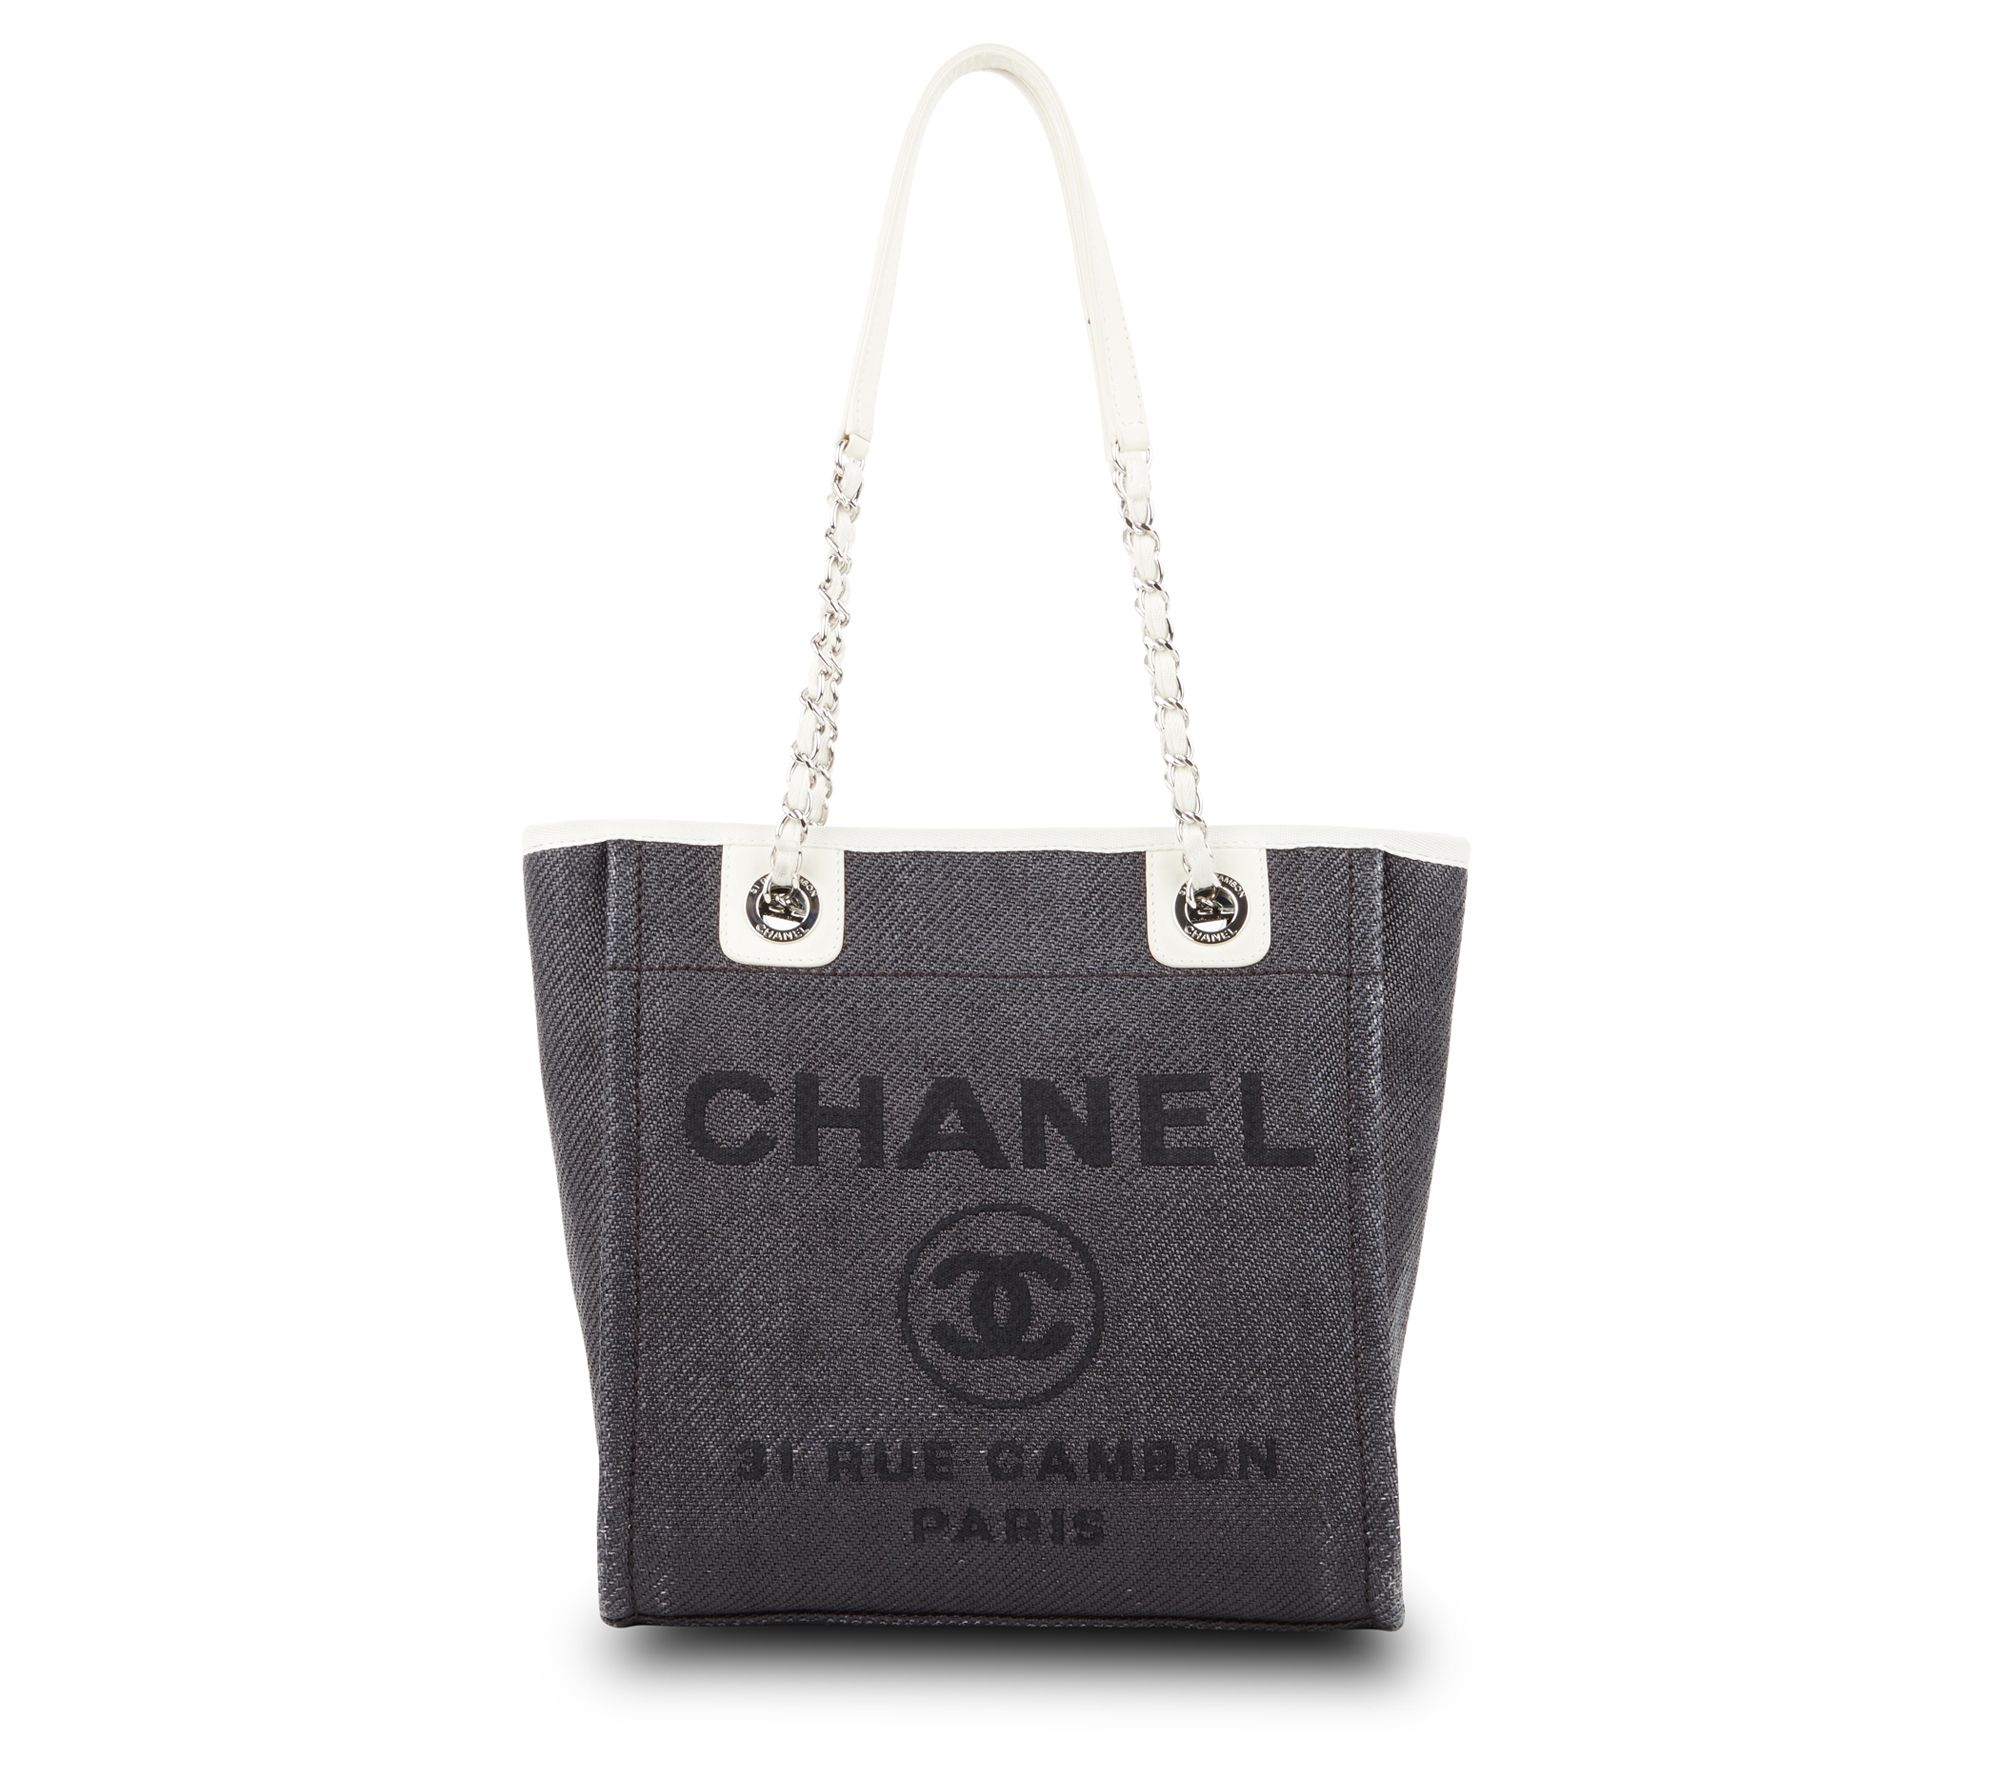 Chanel Deauville Tote Canvas Medium Yellow 2247301